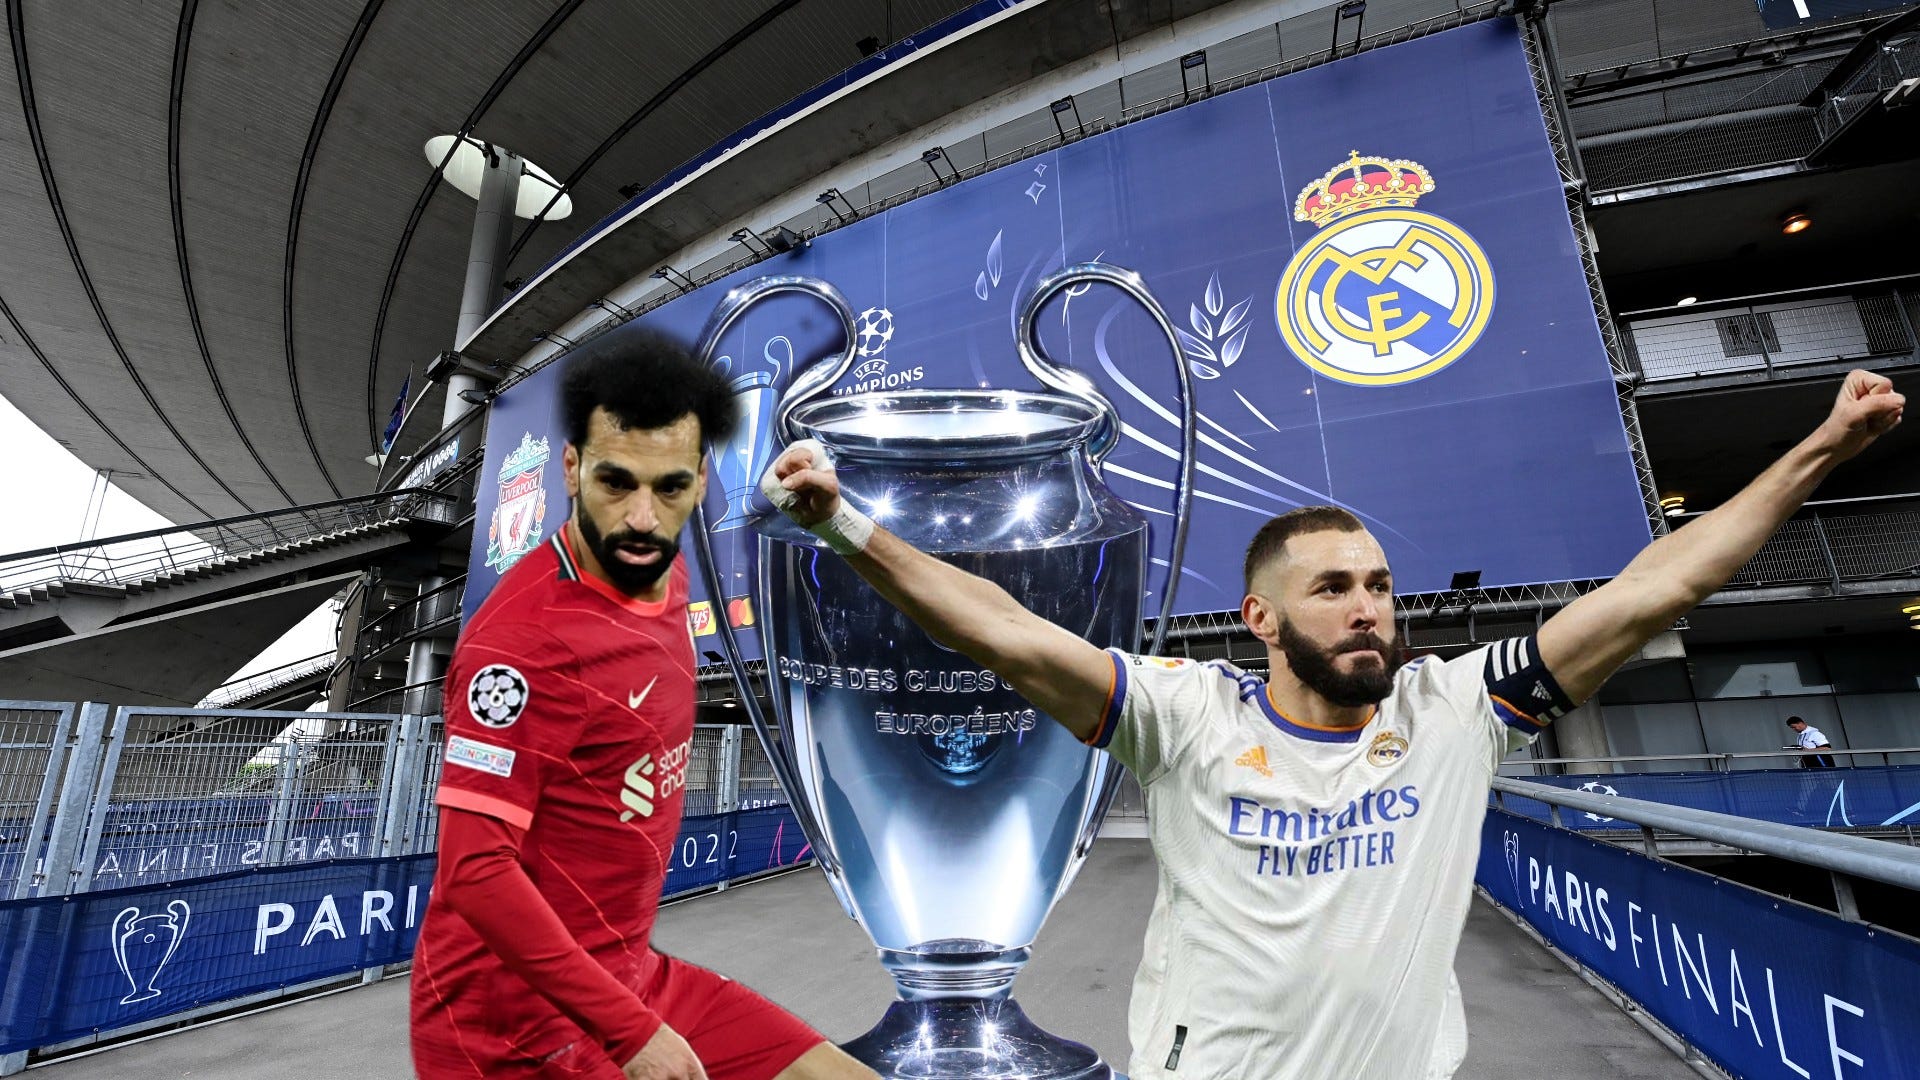 How to watch Liverpool vs Real Madrid in the 2021-22 Champions League final from India? Goal